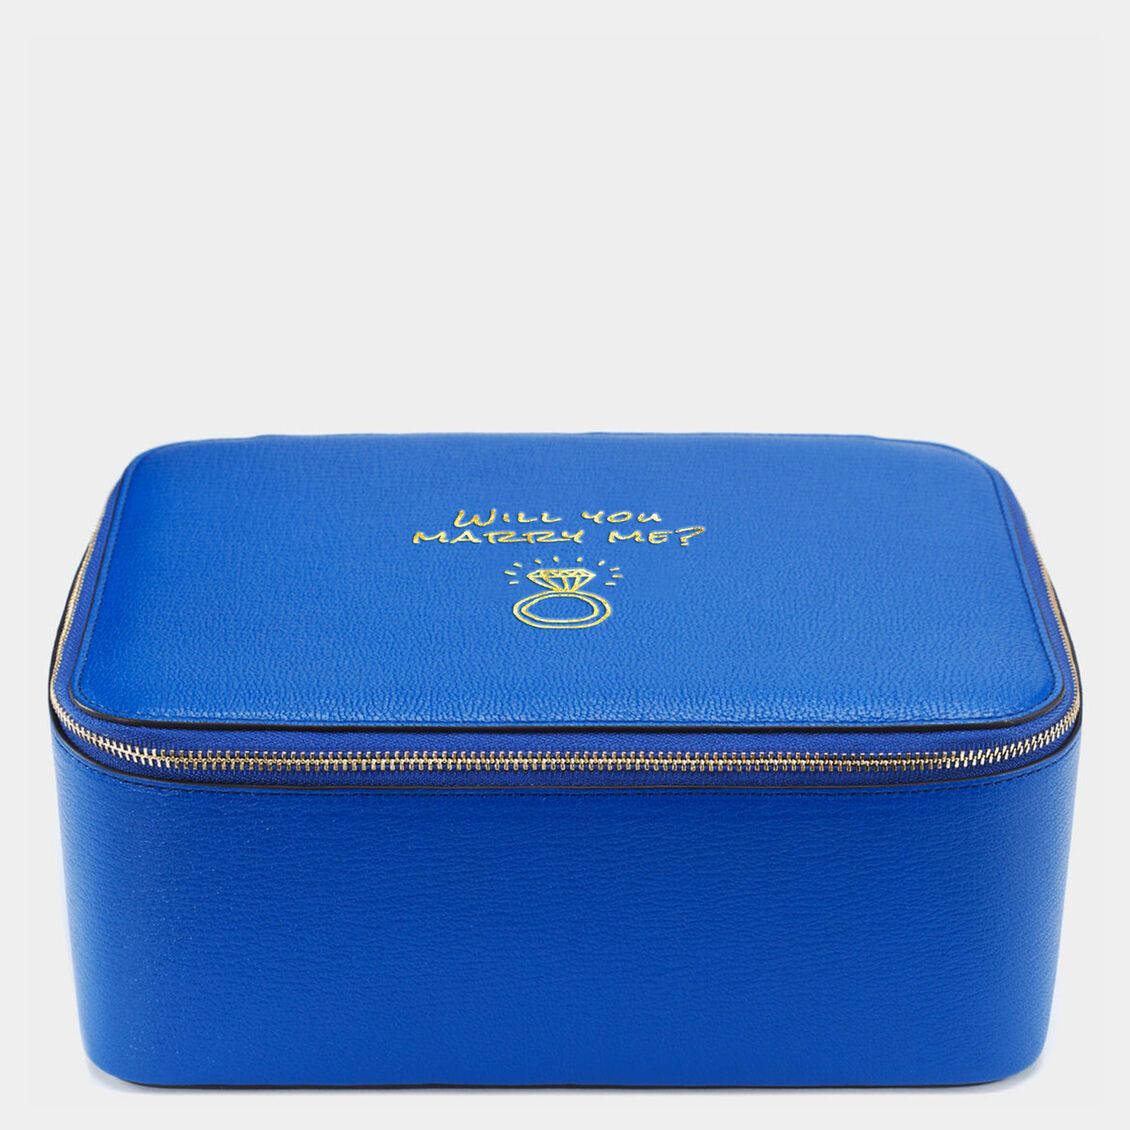 Yes No Maybe Wow Box XL -

                  
                    Capra Leather in Electric Blue -
                  

                  Anya Hindmarch EU
